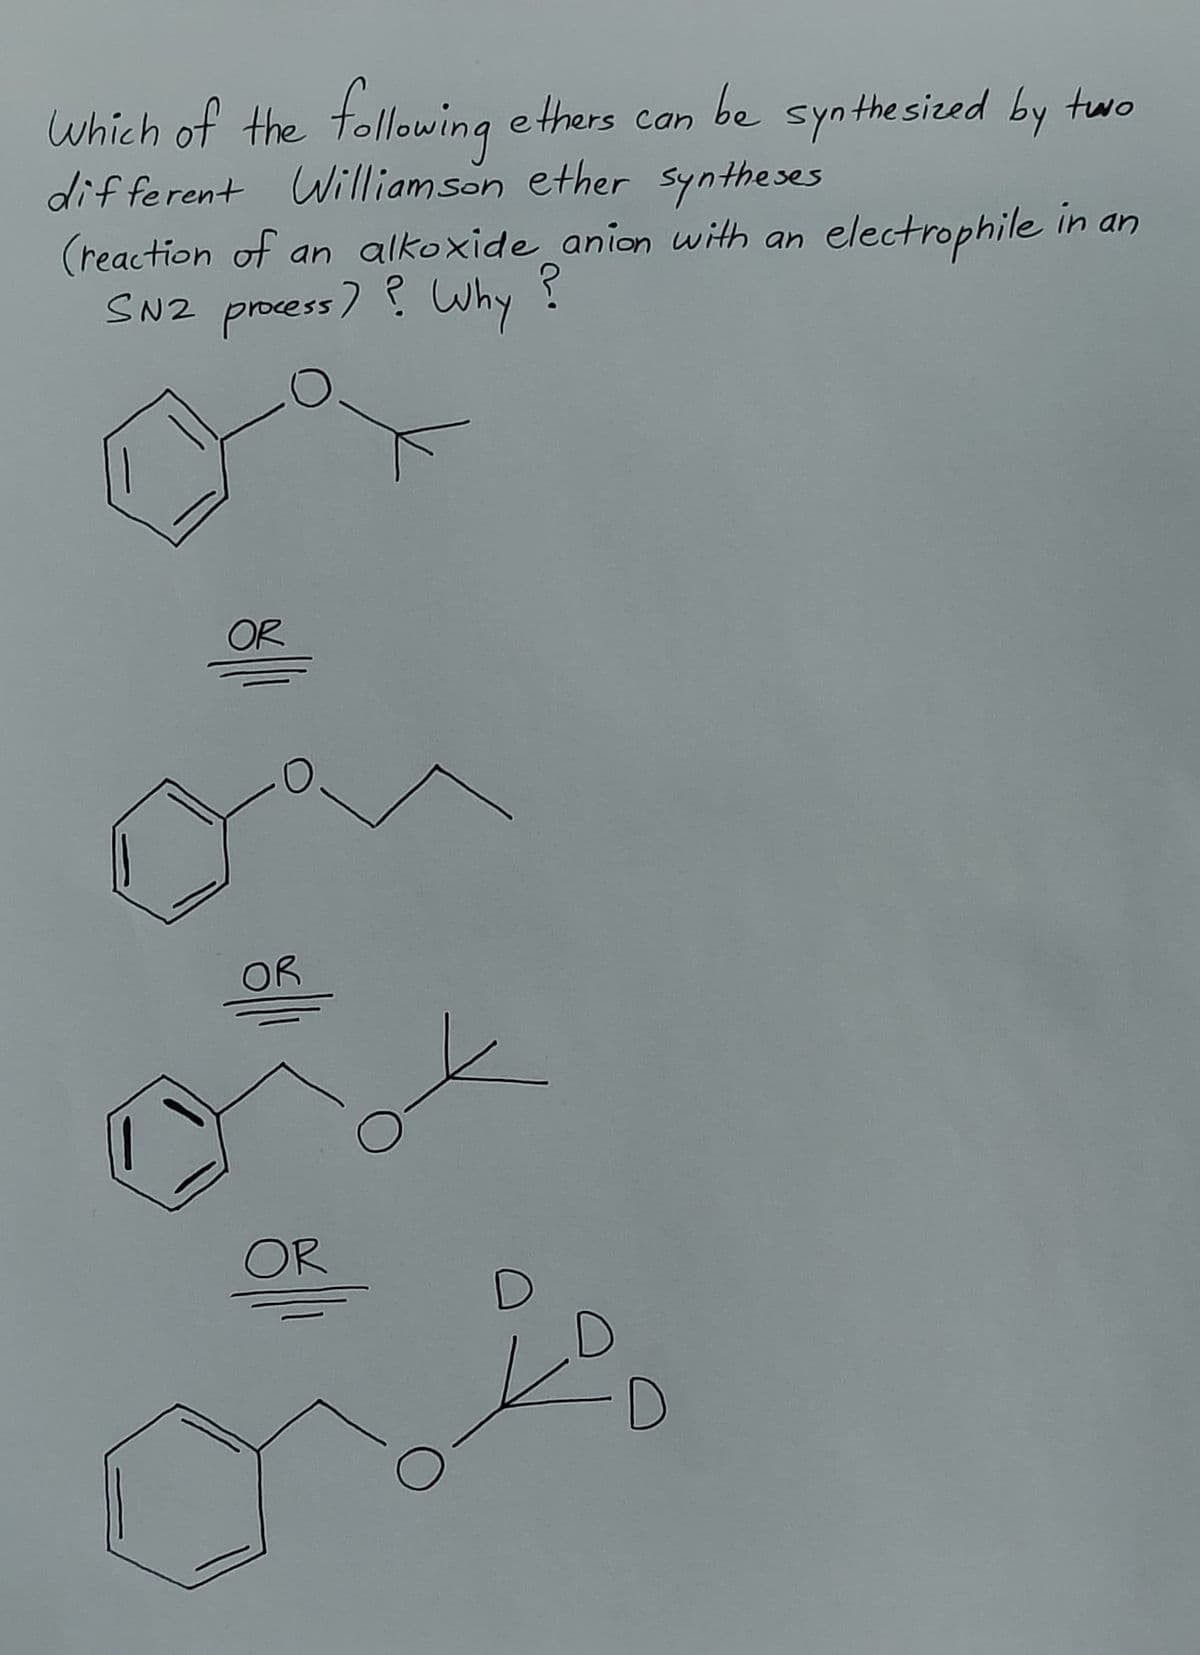 Which of the following
ethers can be synthesized by two
different Williamson ether syntheses
(reaction of an alkoxide anion with an electrophile in an
SN2 process? Why
?
OR
OR
OR
О
D
D
D